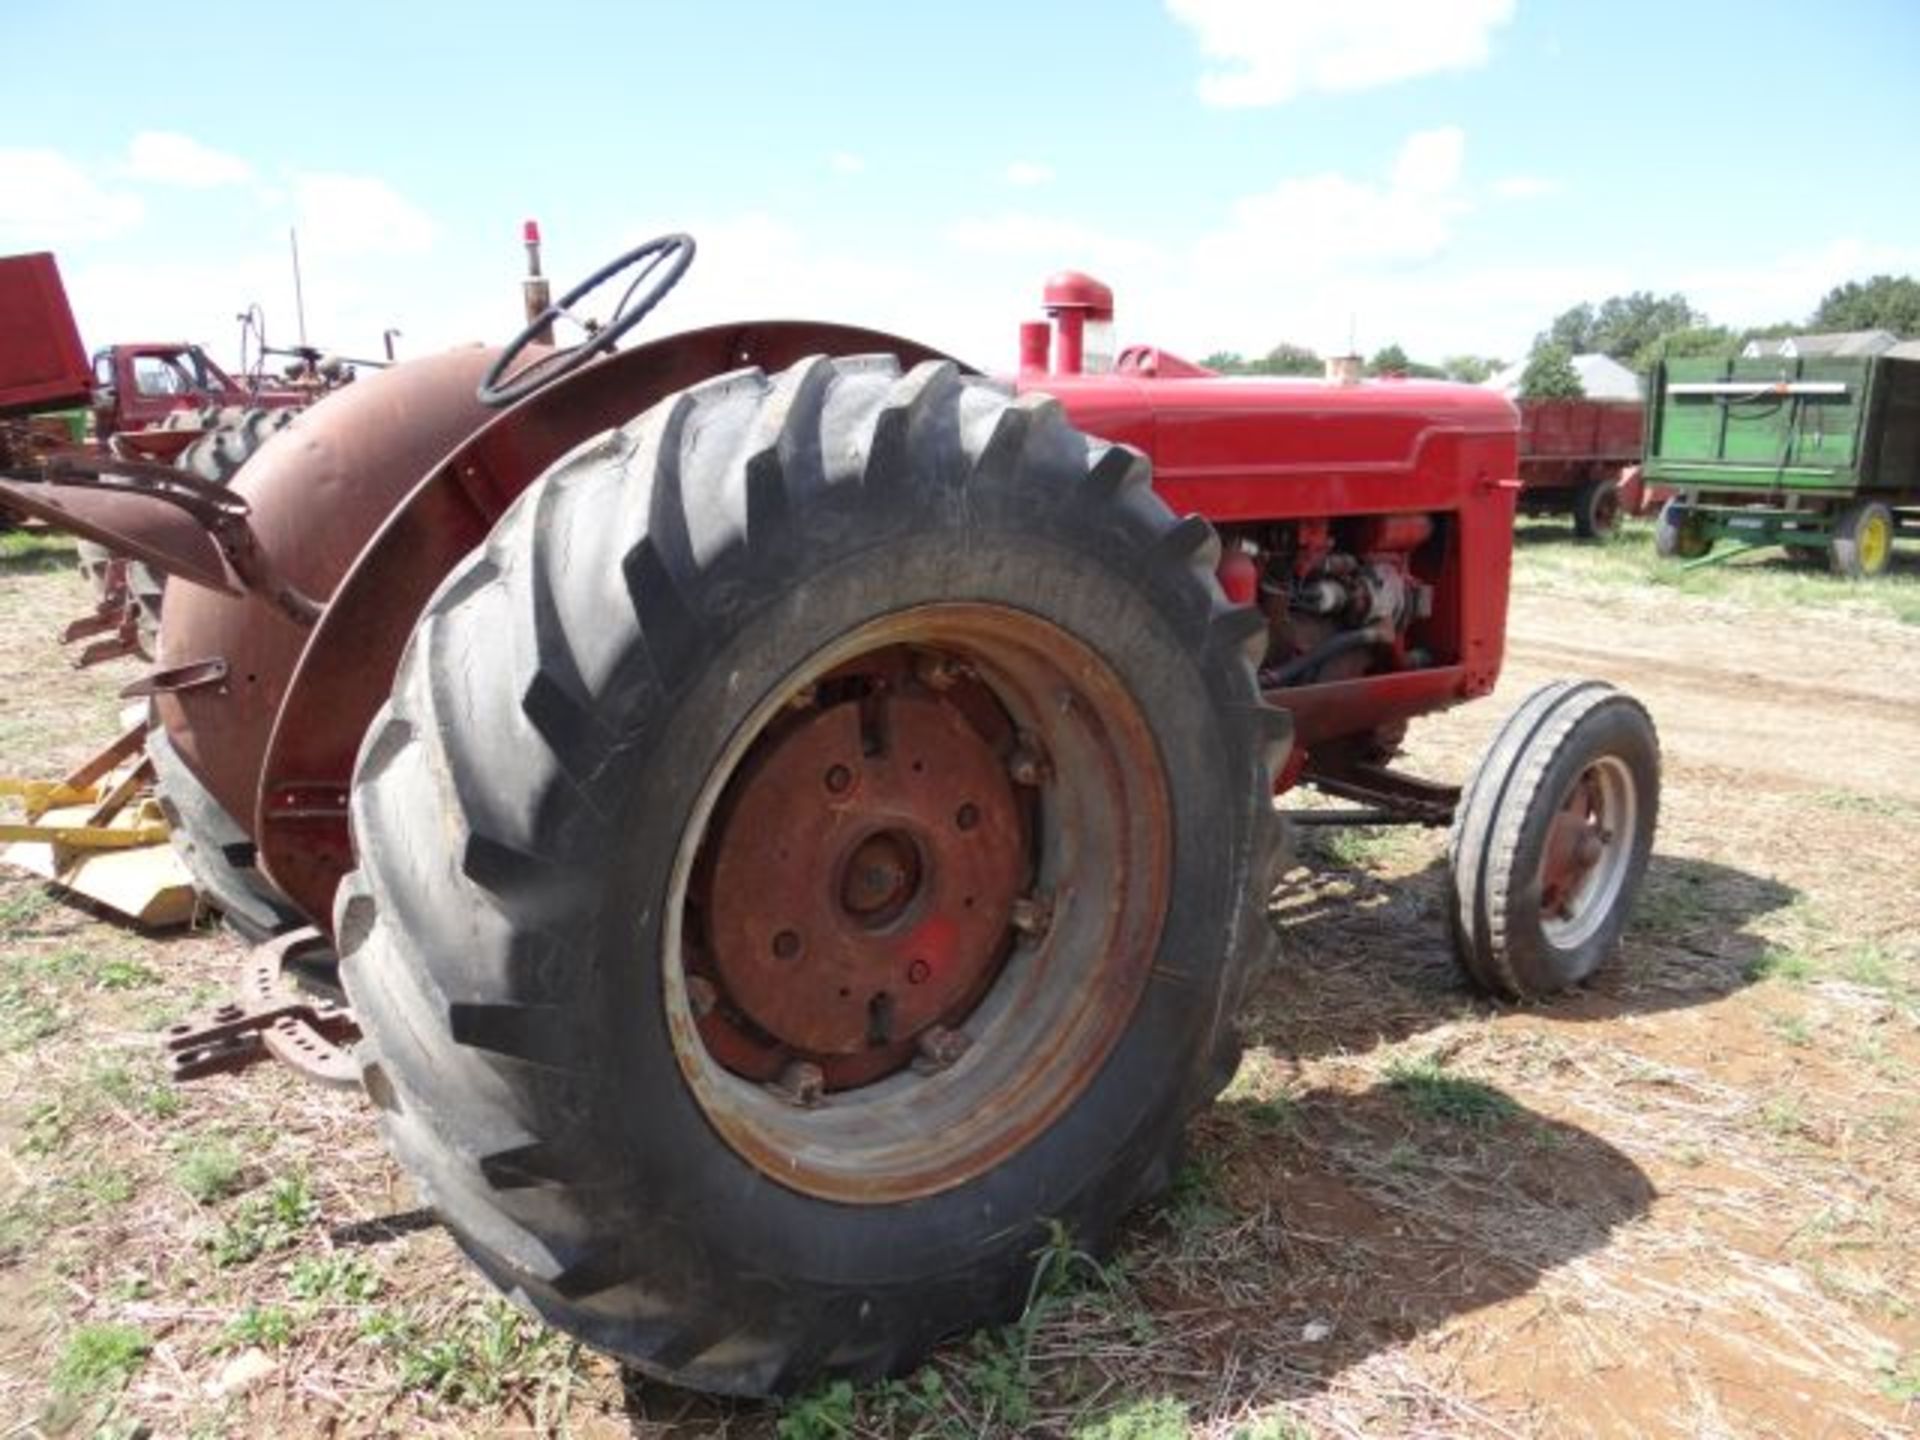 Lot 644 Farmall WD-9 Start on Gas, Runs on Diesel, PTO, 1 SCV, Does Not Run - Image 4 of 4